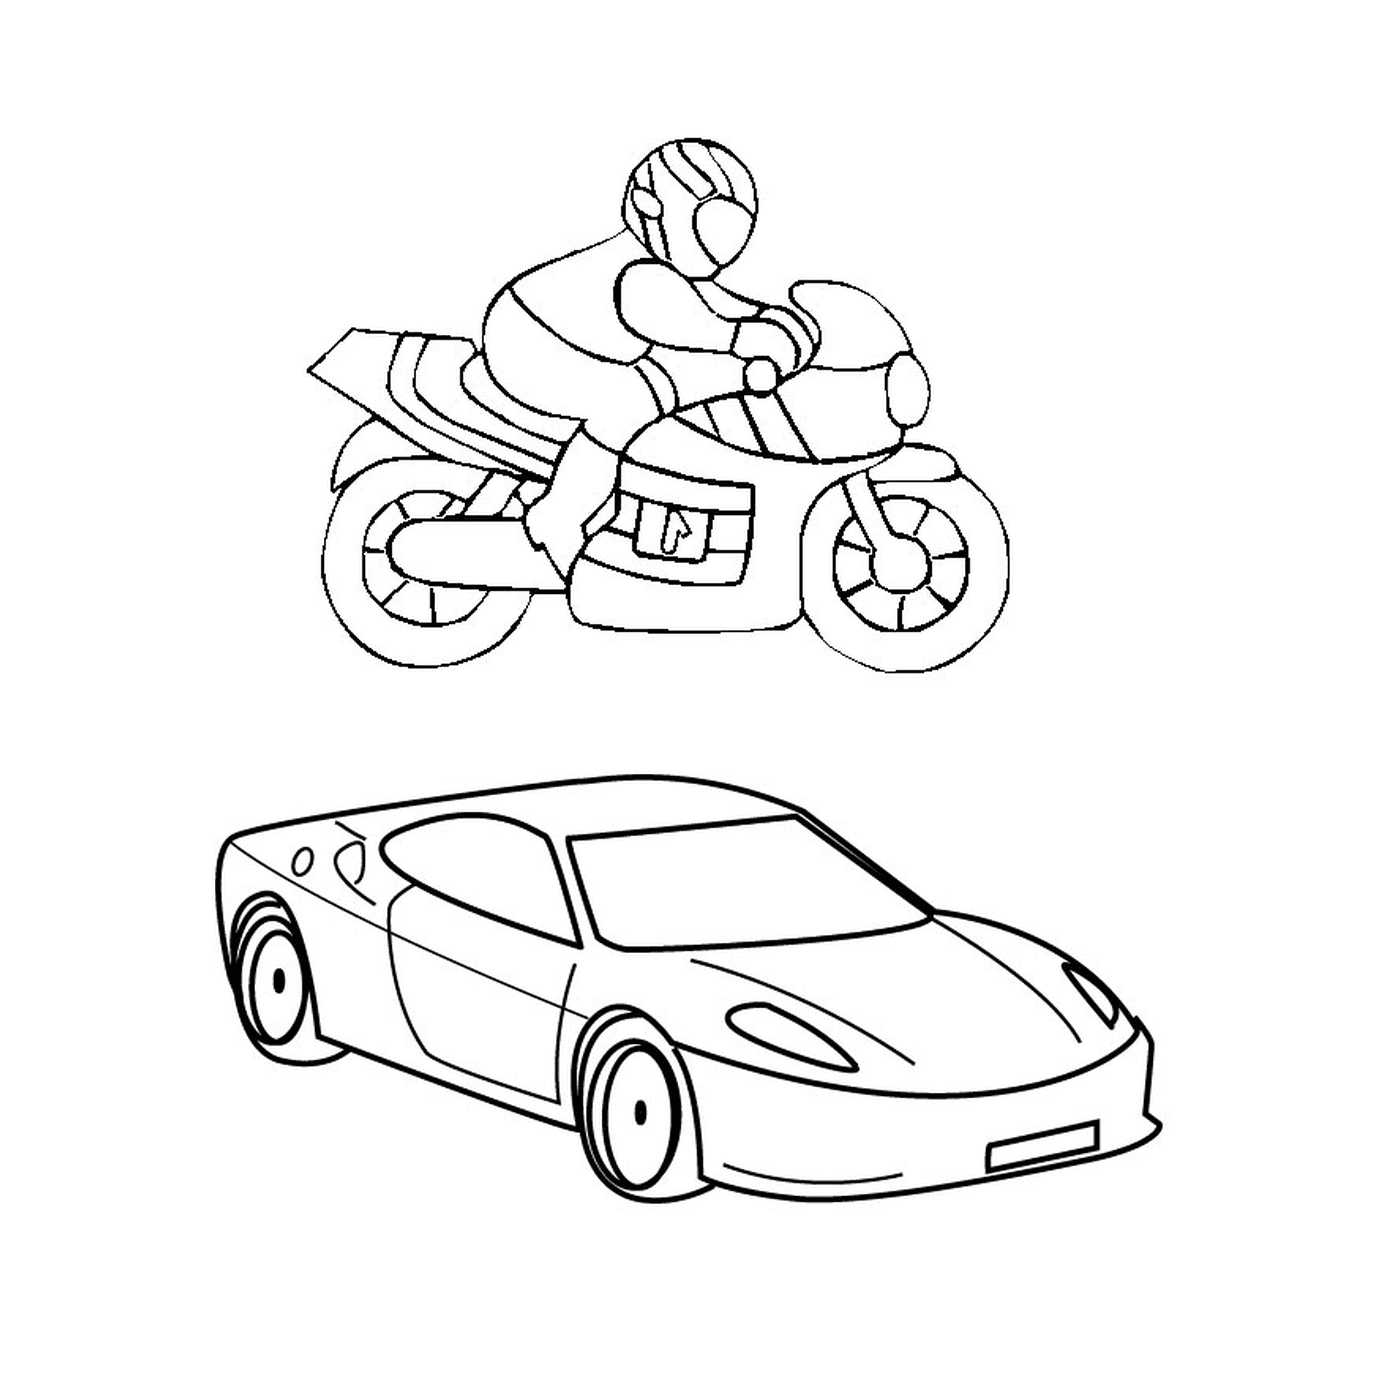  Motorcycle and car, no one on motorcycle 